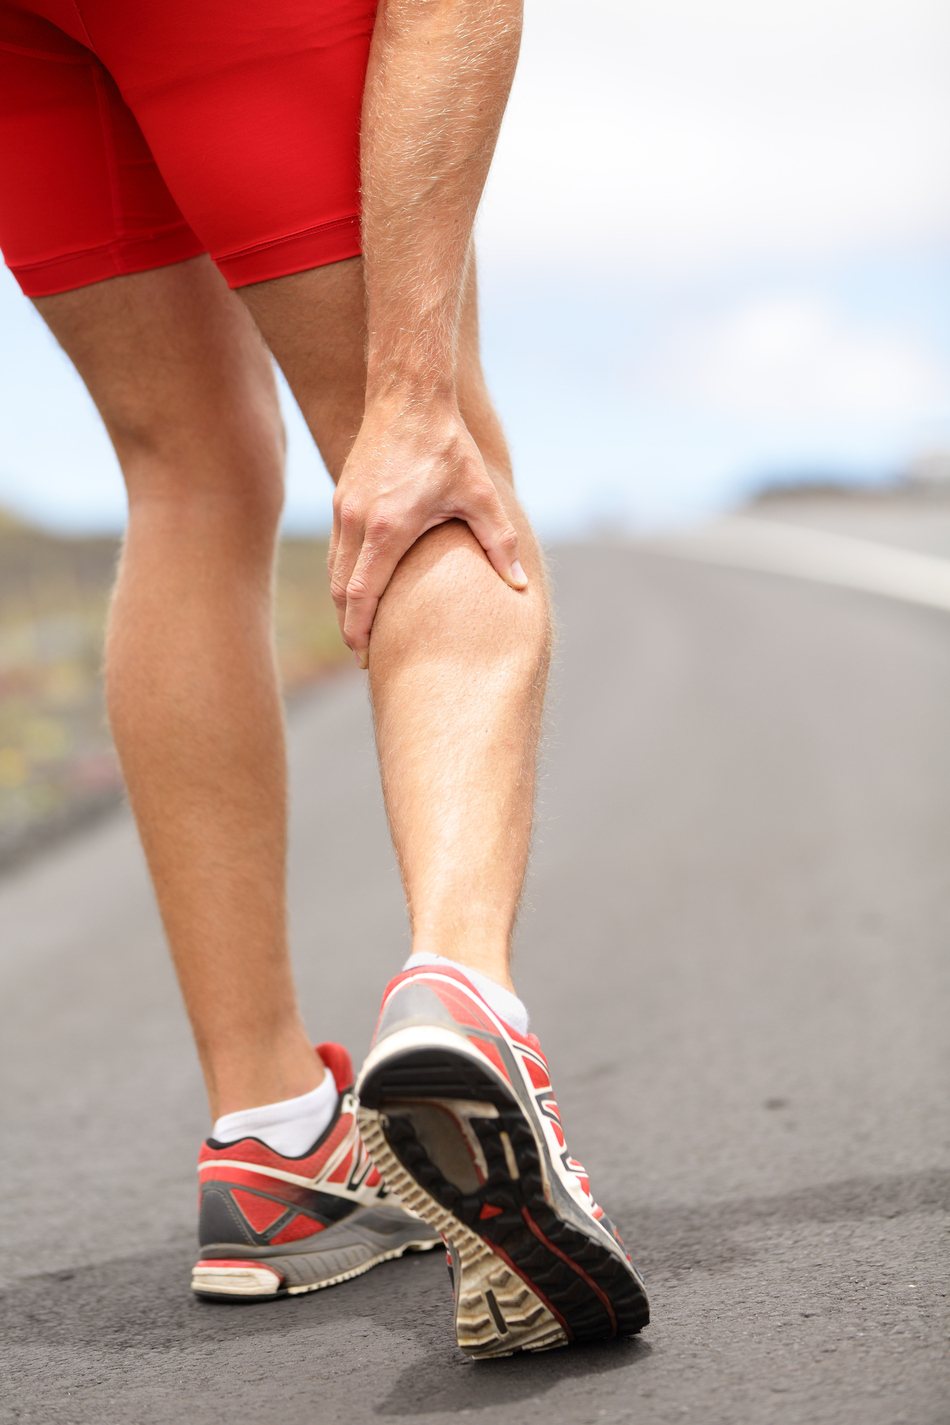 3 Most Common Sports injuries That Can Put You in the ER